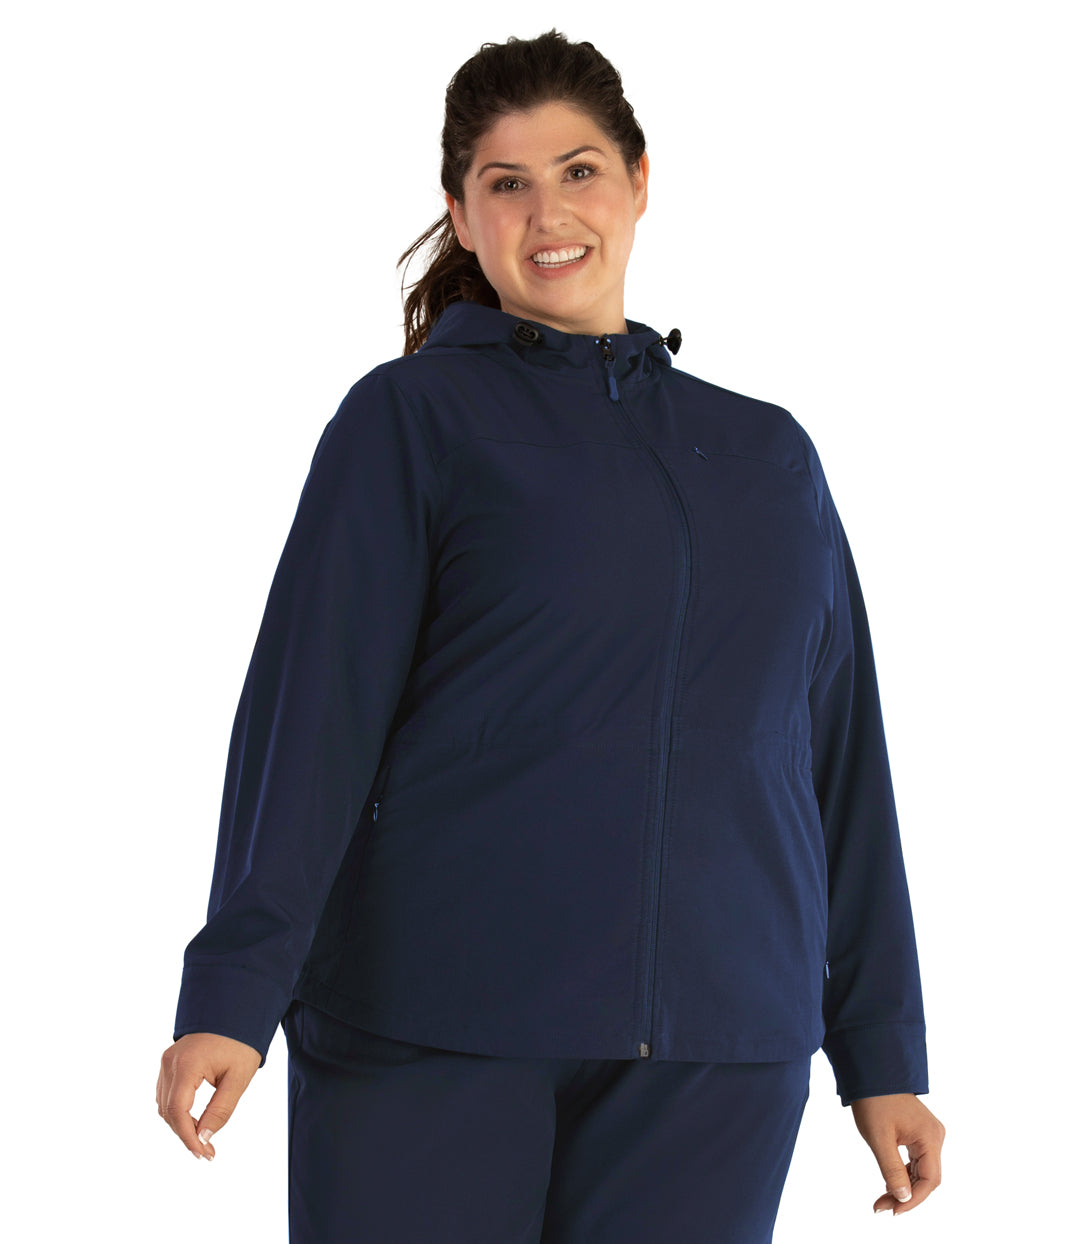 Plus size woman, front view, wearing a JunoActive plus size Hiking and Travel Jacket in navy blue. The jacket has a hood, zip front closure and side zip pockets. The length of the plus size jacket hits at the hips.